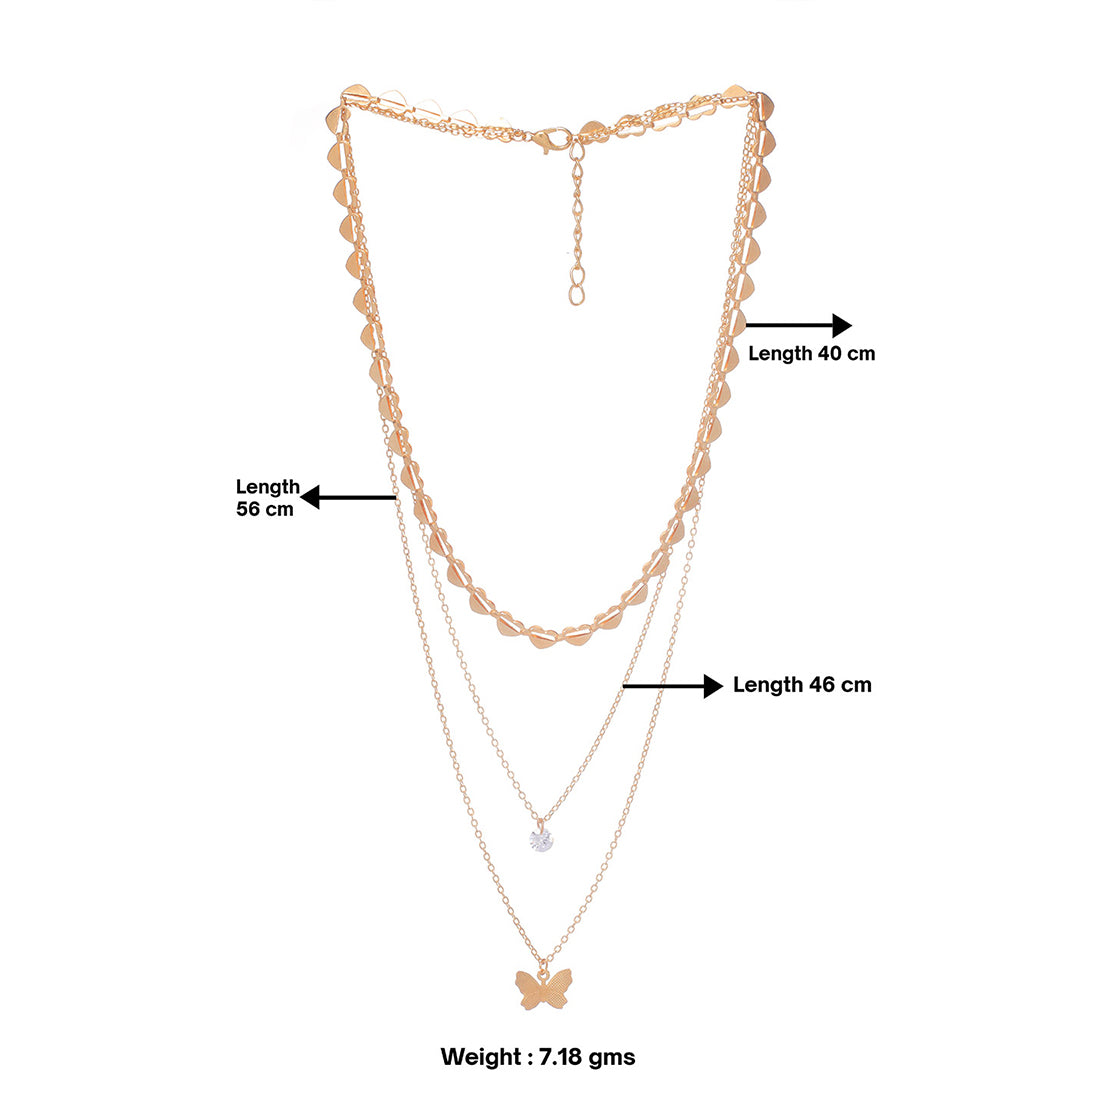 Trendy Three Layered Gold Necklace with Butterfly Pendant , diamonti stone and Chain of Hearts